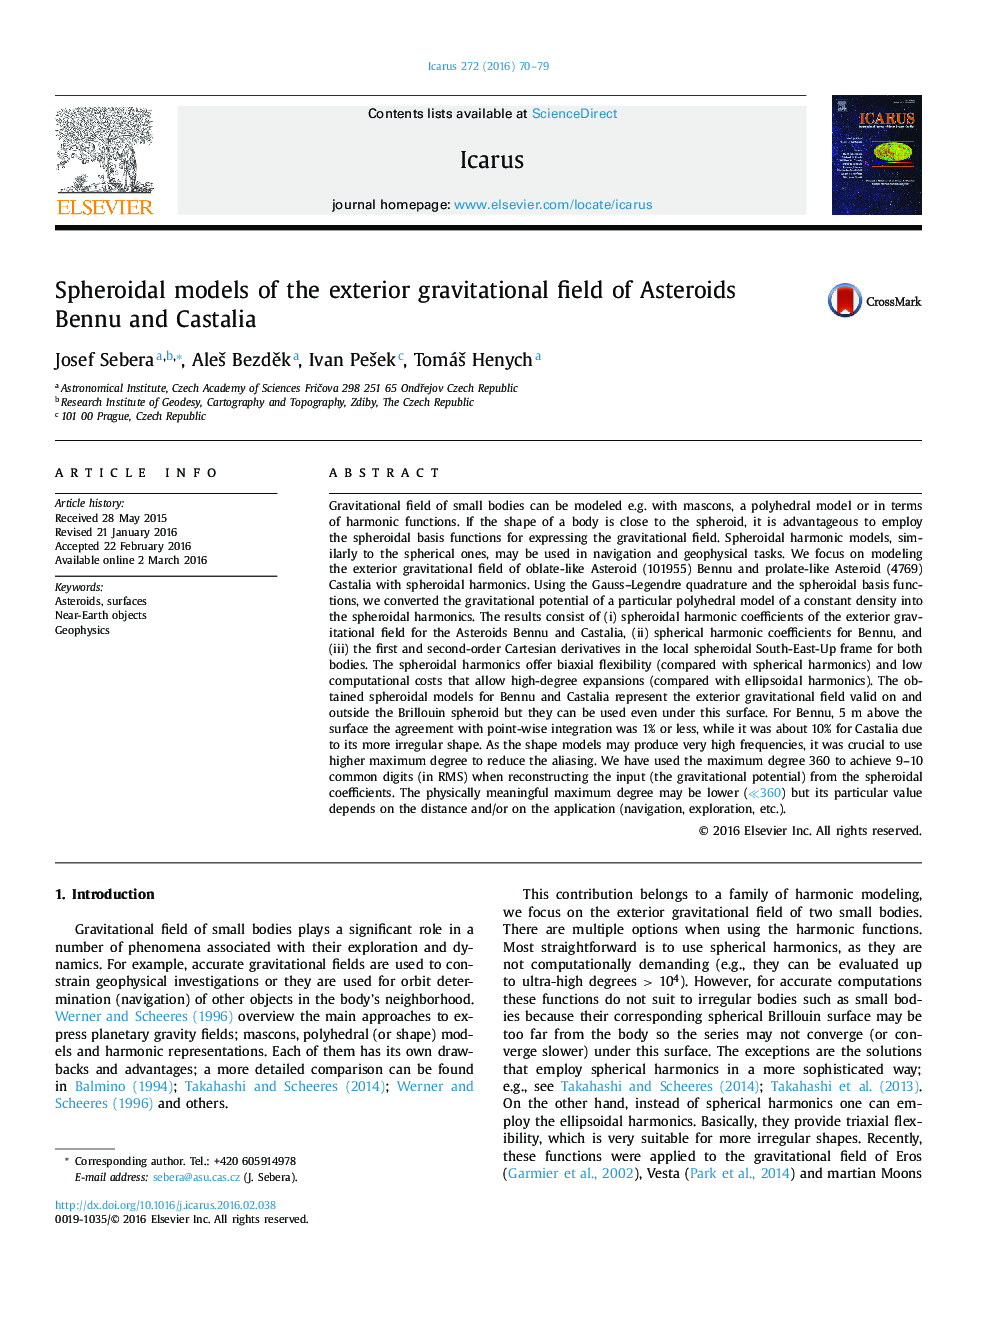 Spheroidal models of the exterior gravitational field of Asteroids Bennu and Castalia